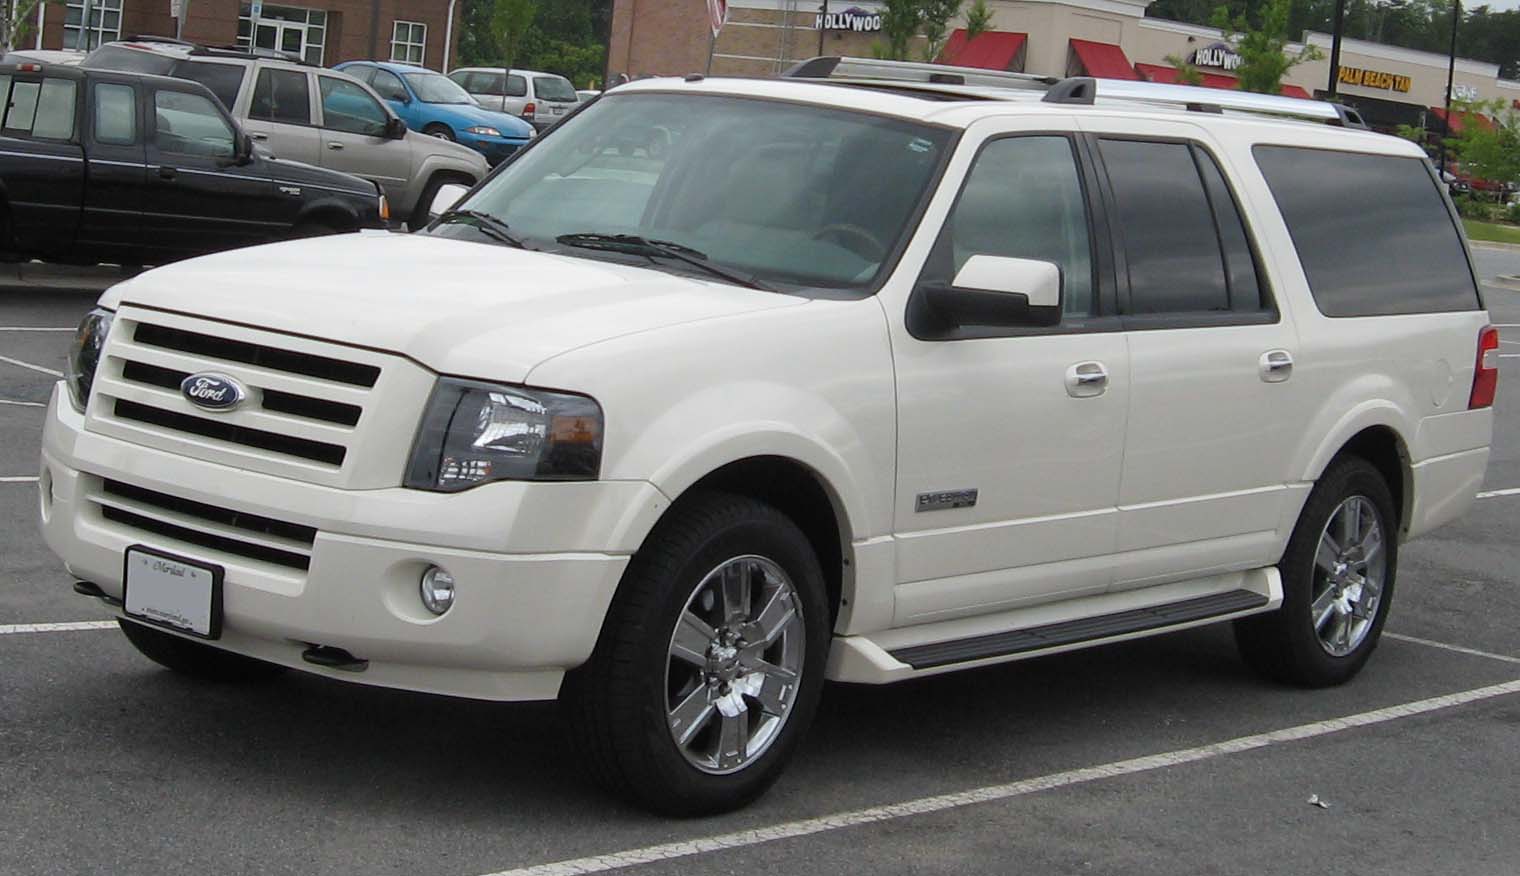 Ford Expedition II 2002 - 2006 SUV 5 door #8